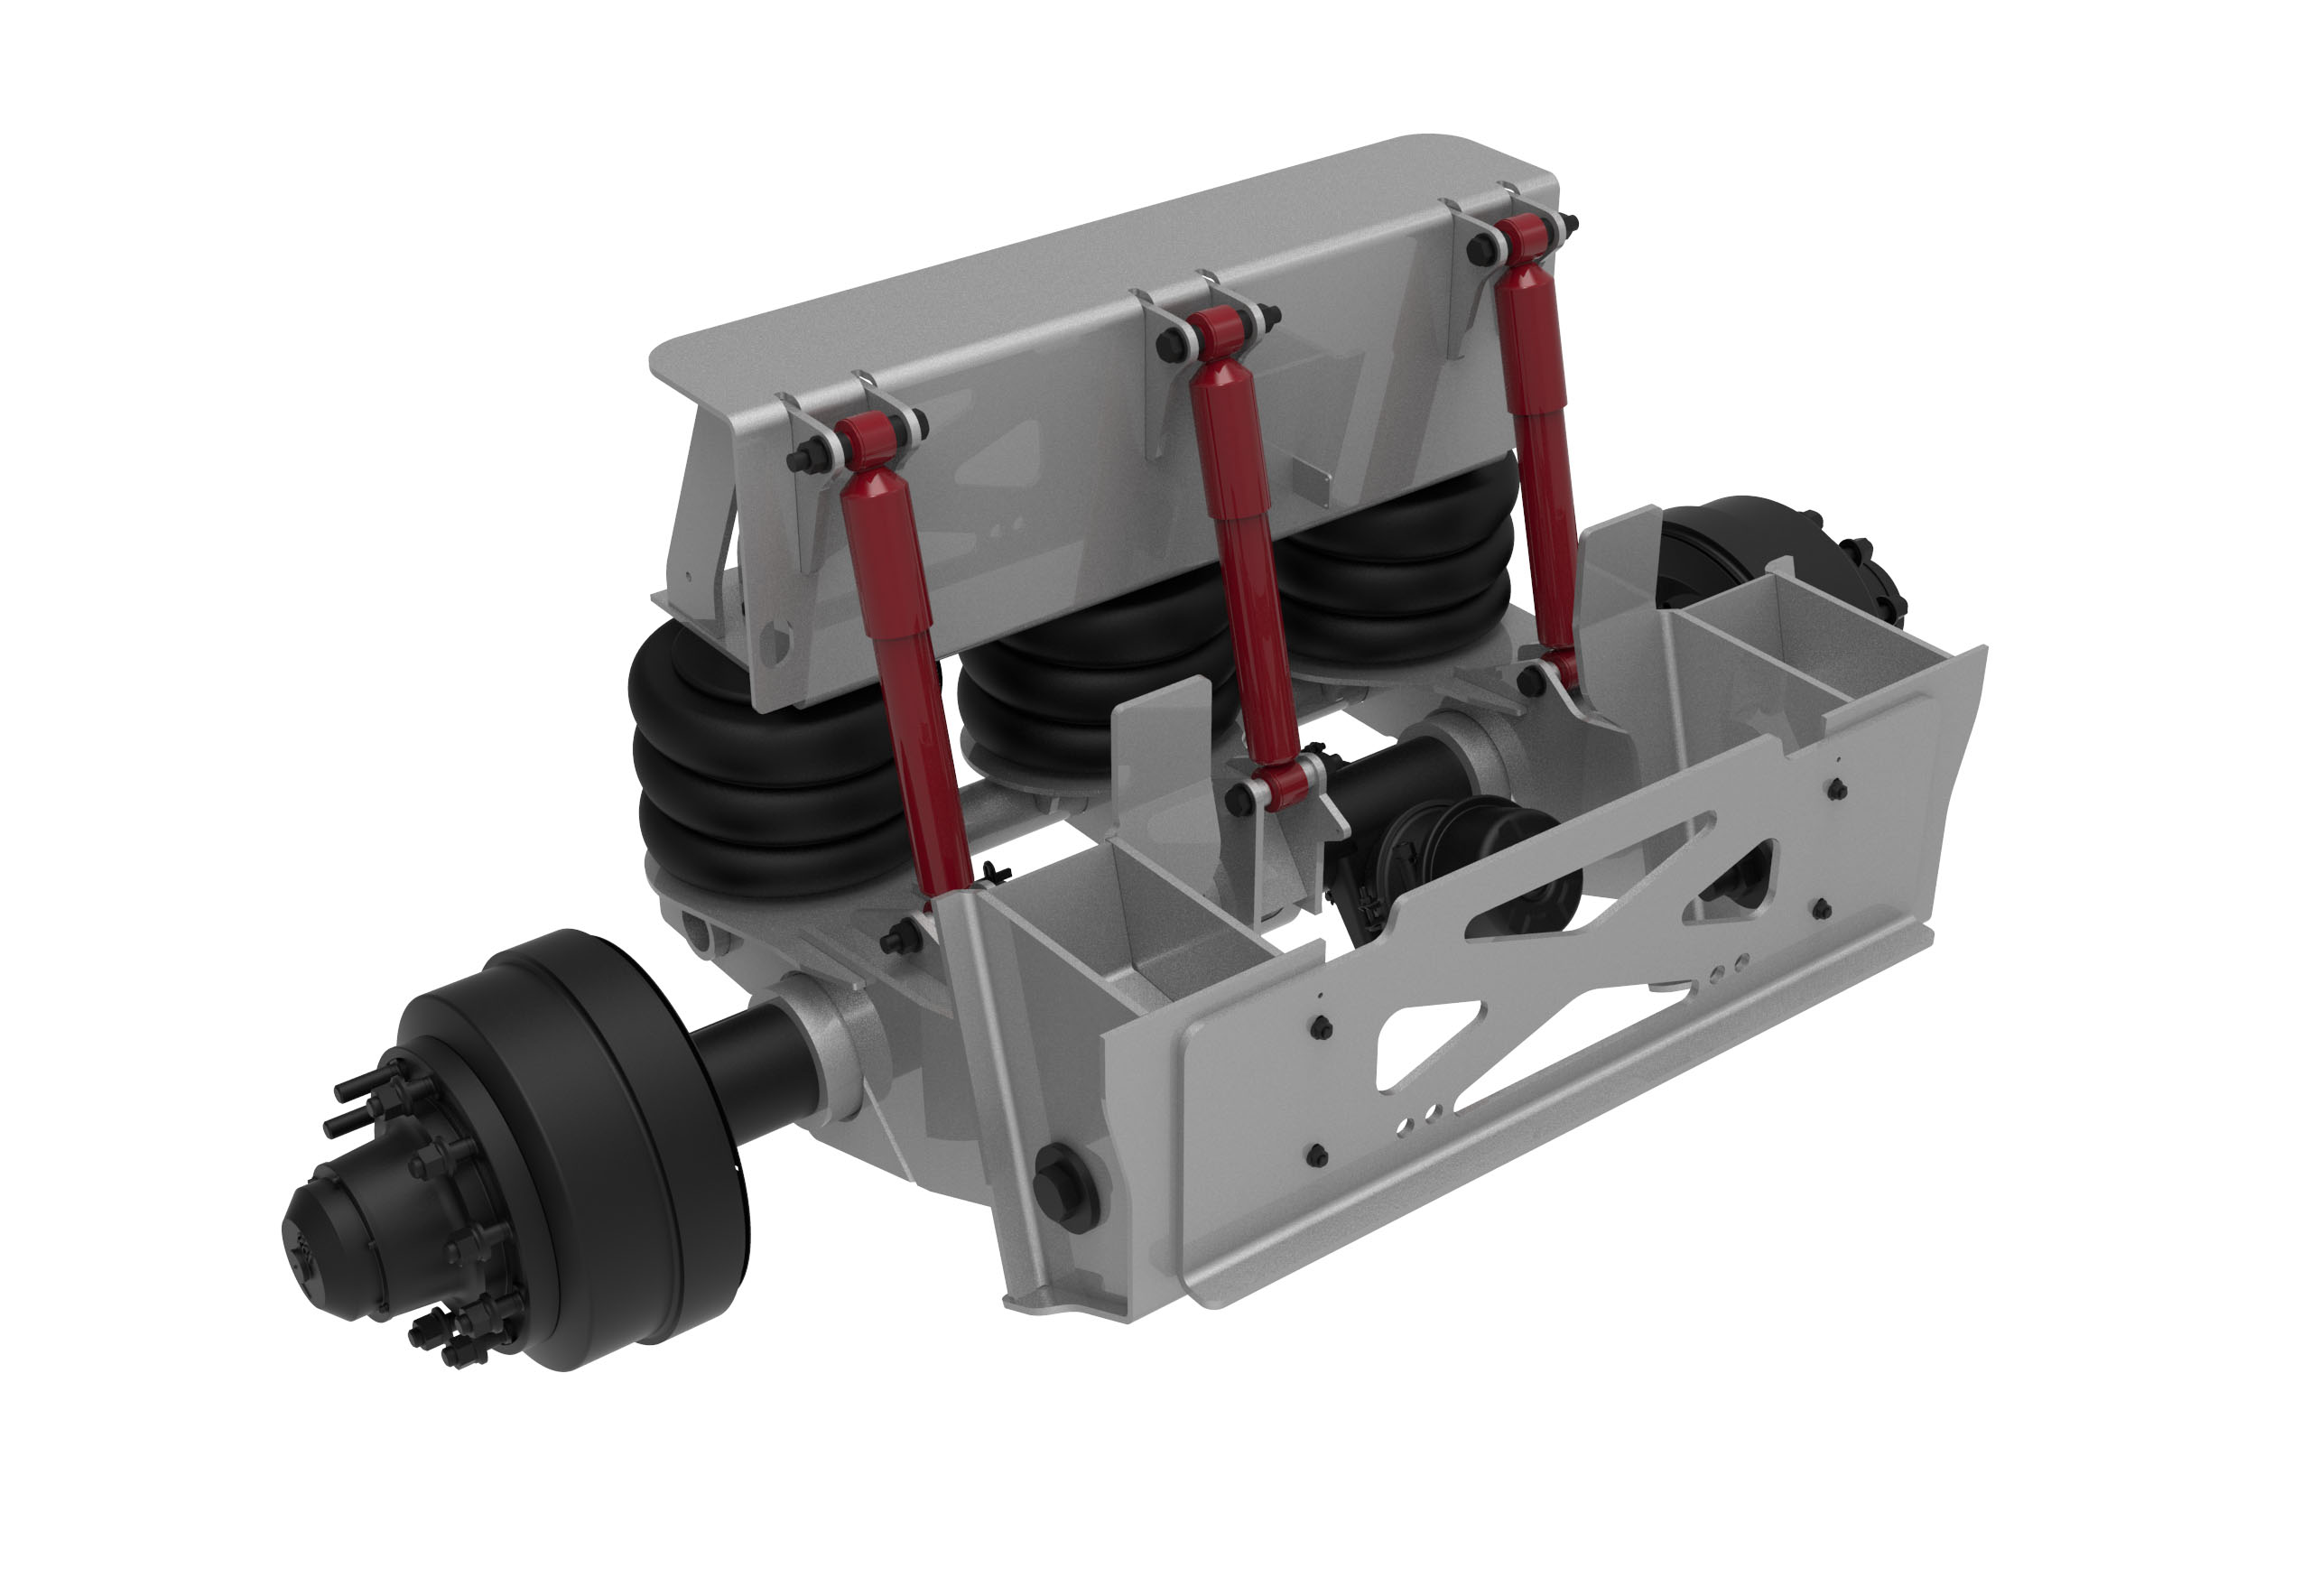 The shocks help mitigate the dynamic forces that can damage trailers, axles and wheel ends, and the system is flexibly designed to allow additional shocks to be added if desired.